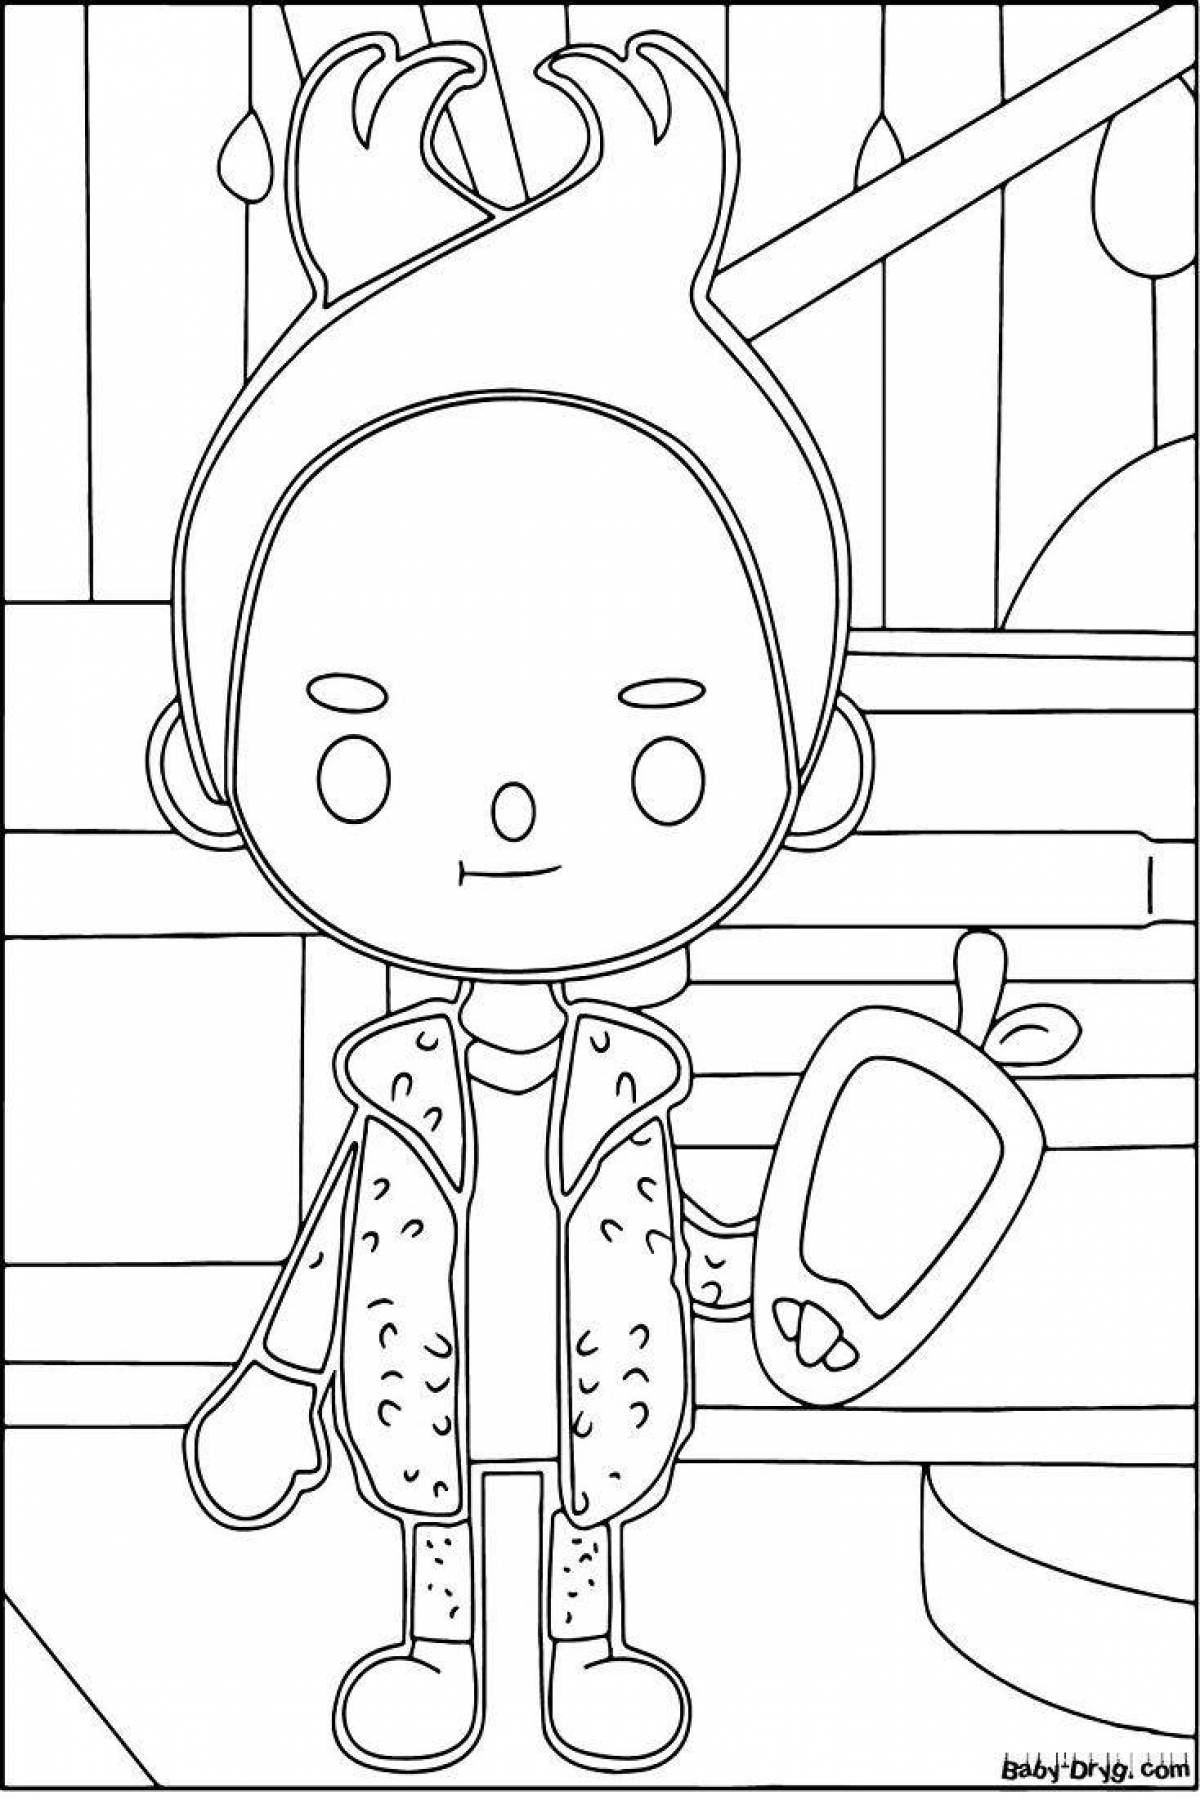 Detailed coloring page of the toilet on the current side